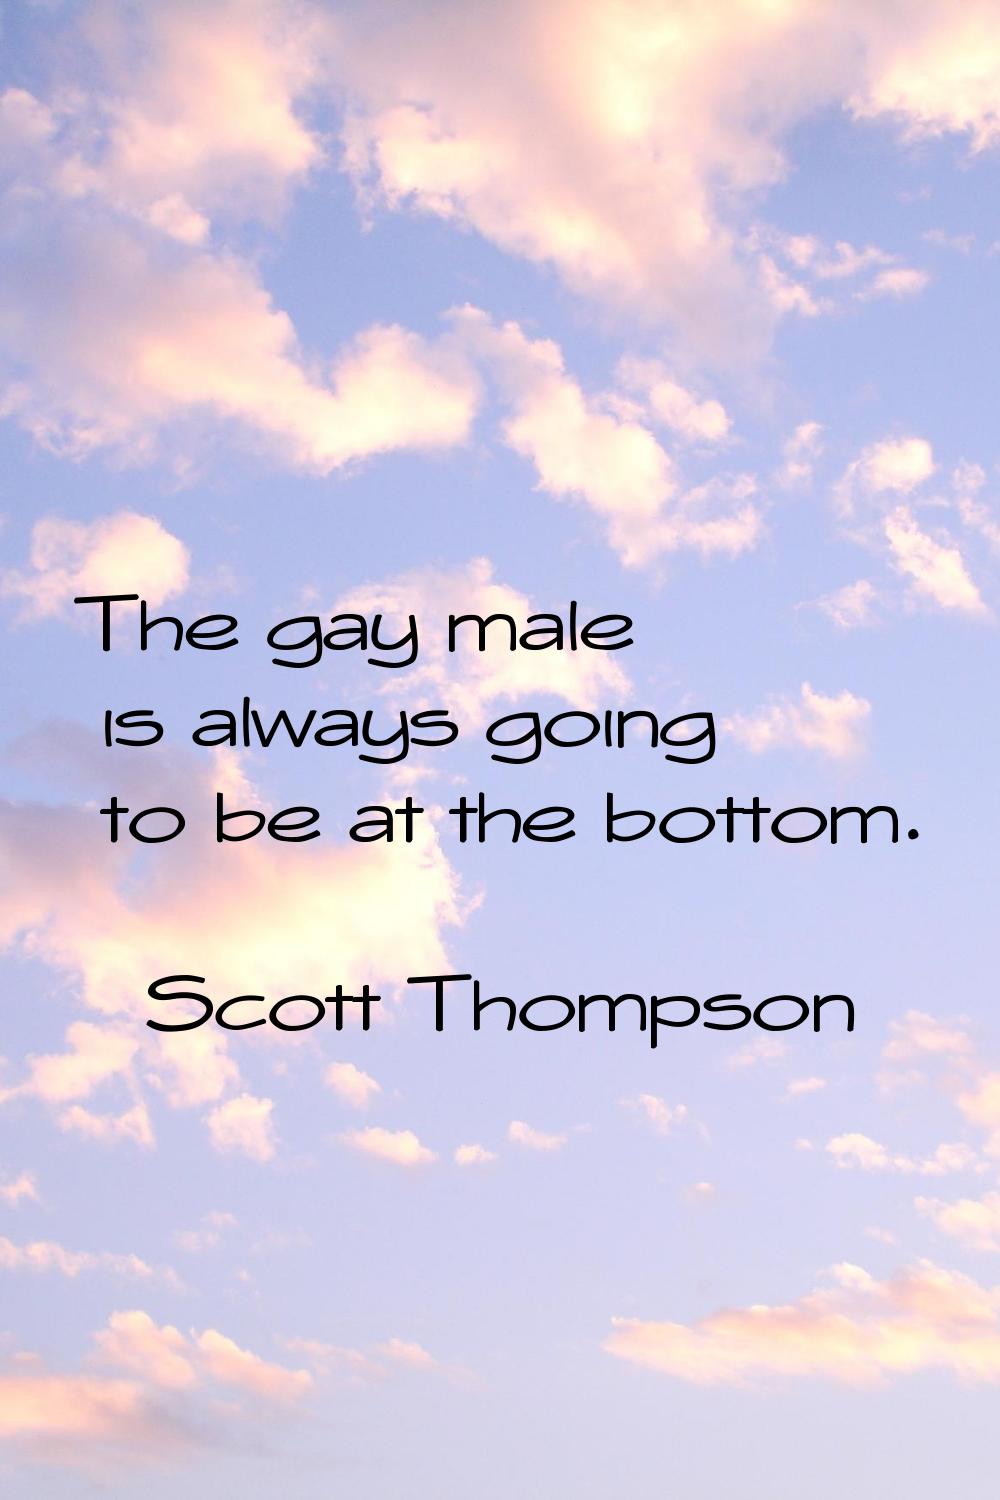 The gay male is always going to be at the bottom.